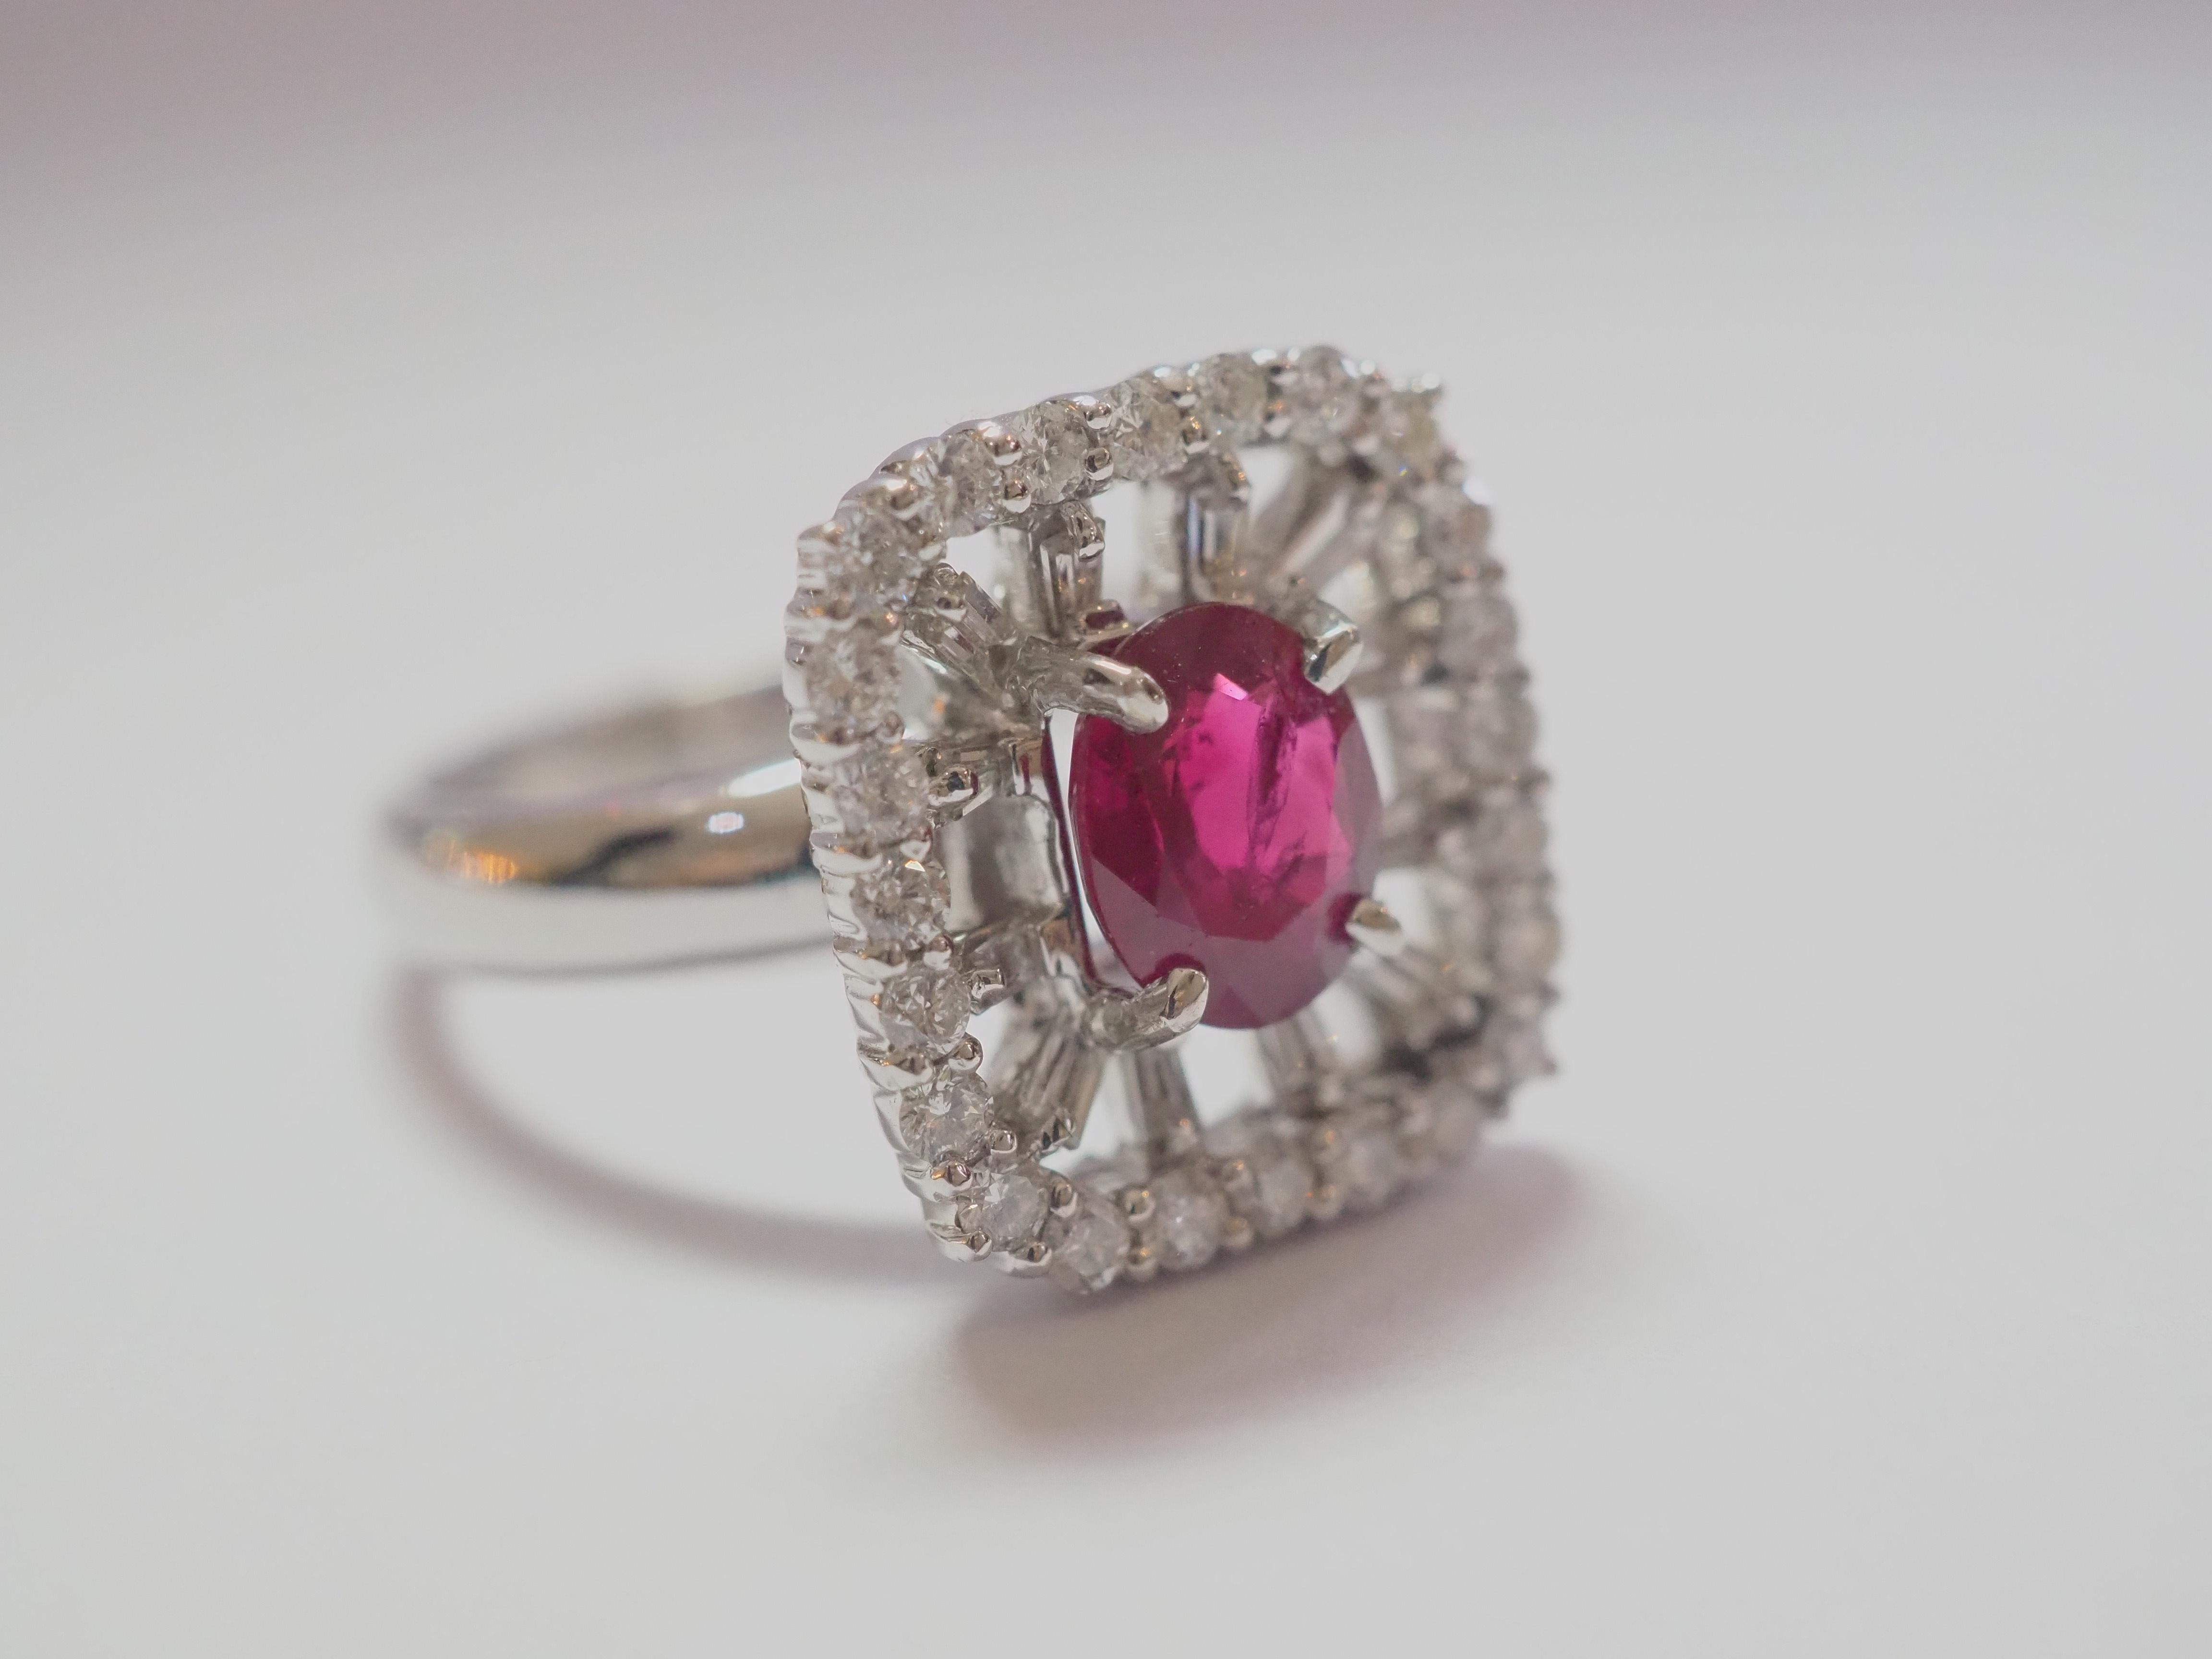 AIGS 18k White Gold 1.28ct Oval Thai Ruby & 0.7ct Diamond Cocktail Ring 2